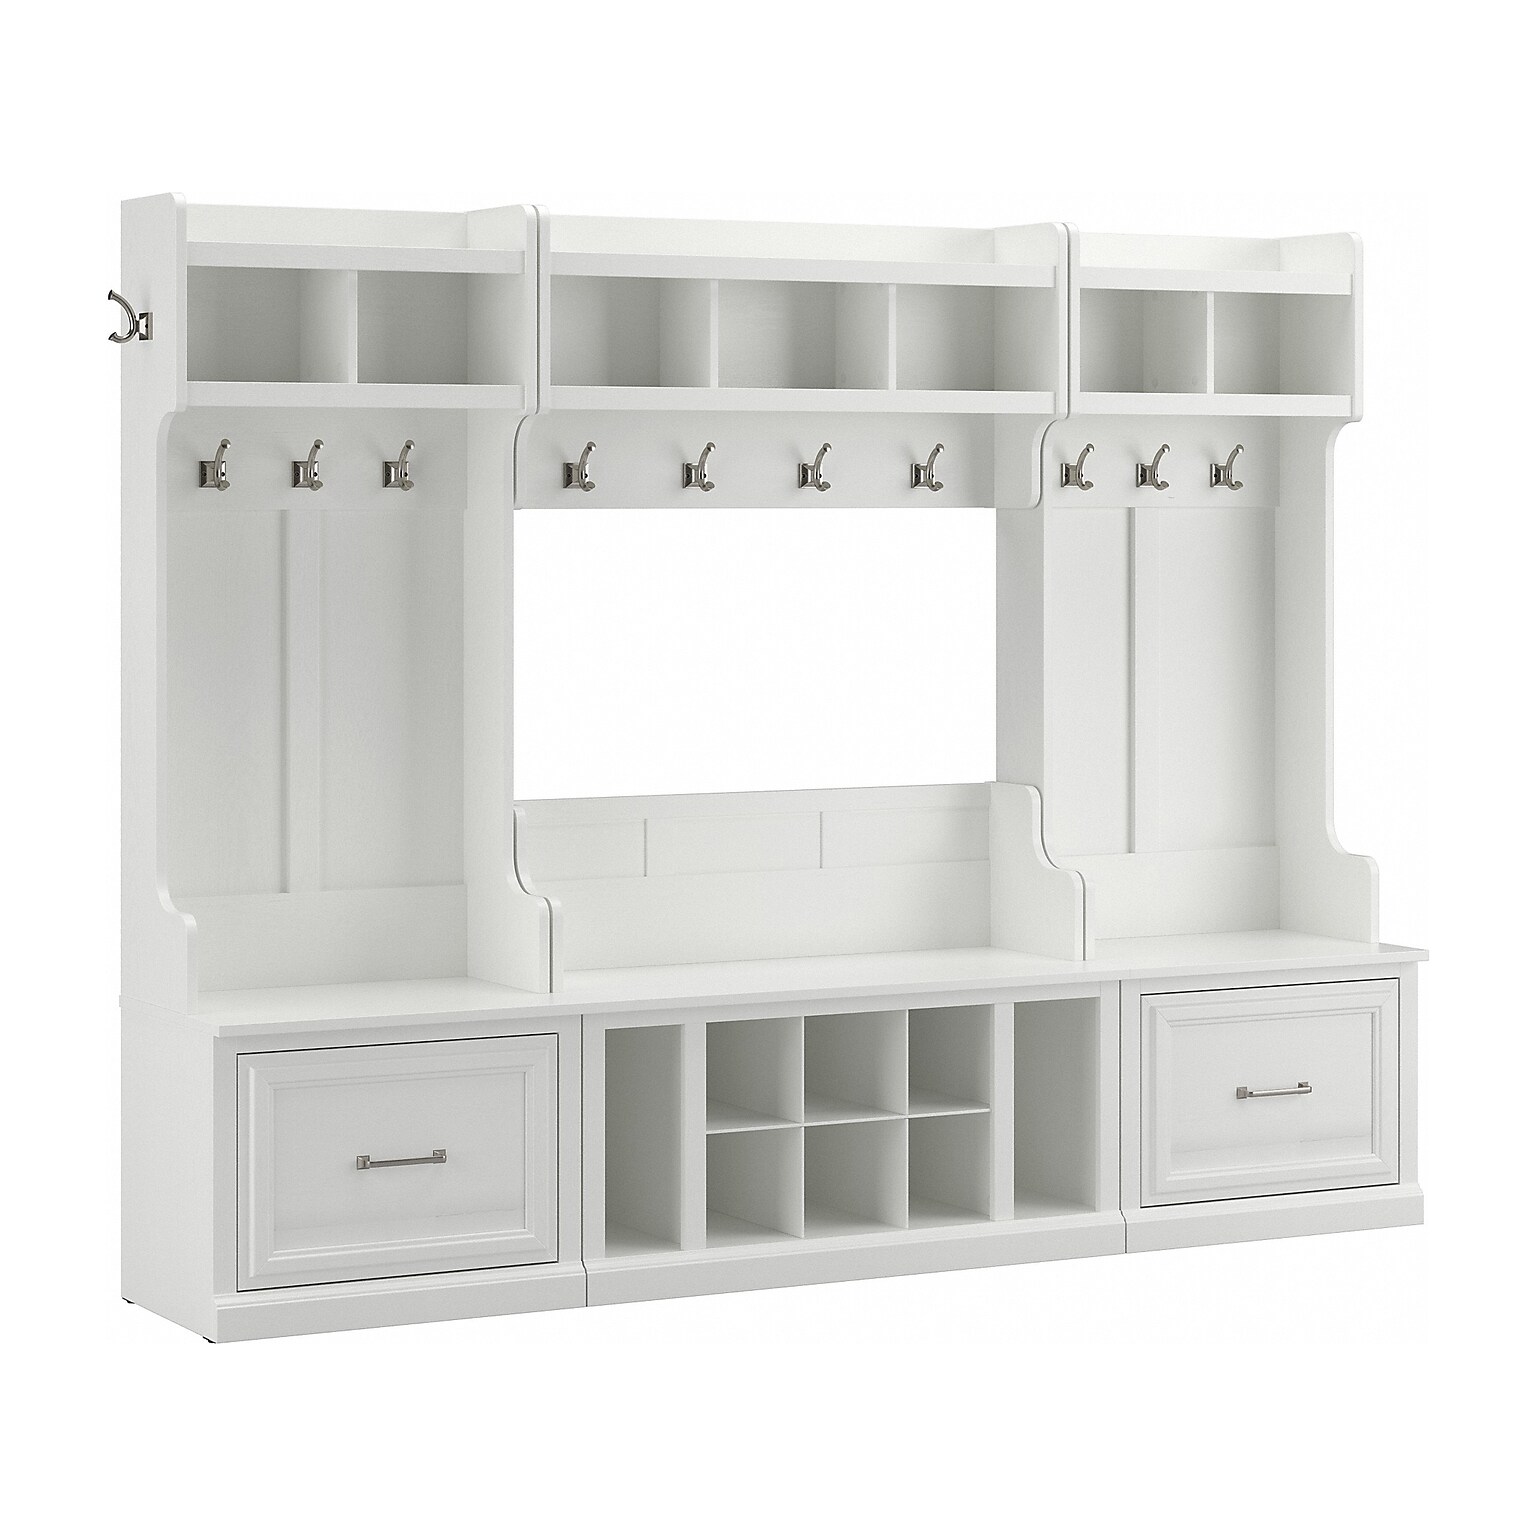 Bush Furniture Woodland Full Entryway Storage Set with Coat Rack and Shoe Bench with Drawers, White Ash (WDL014WAS)